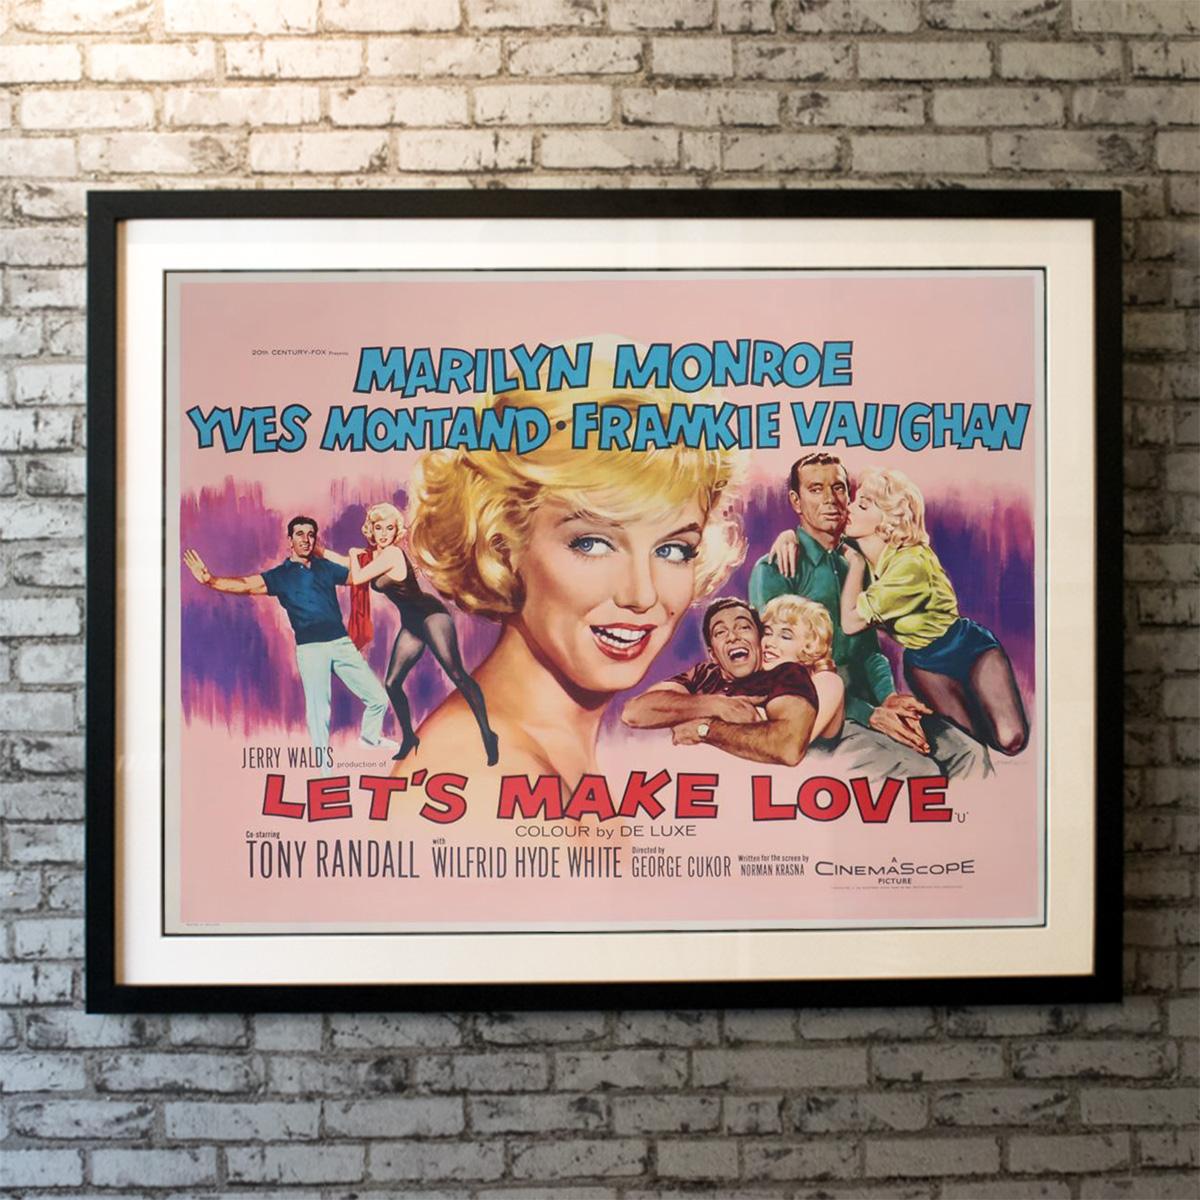 A fantastic piece of Marilyn Monroe memorabilia & one of the most collectable Chantrell Quads. This is a rare poster from the 1960 first release in the UK. 